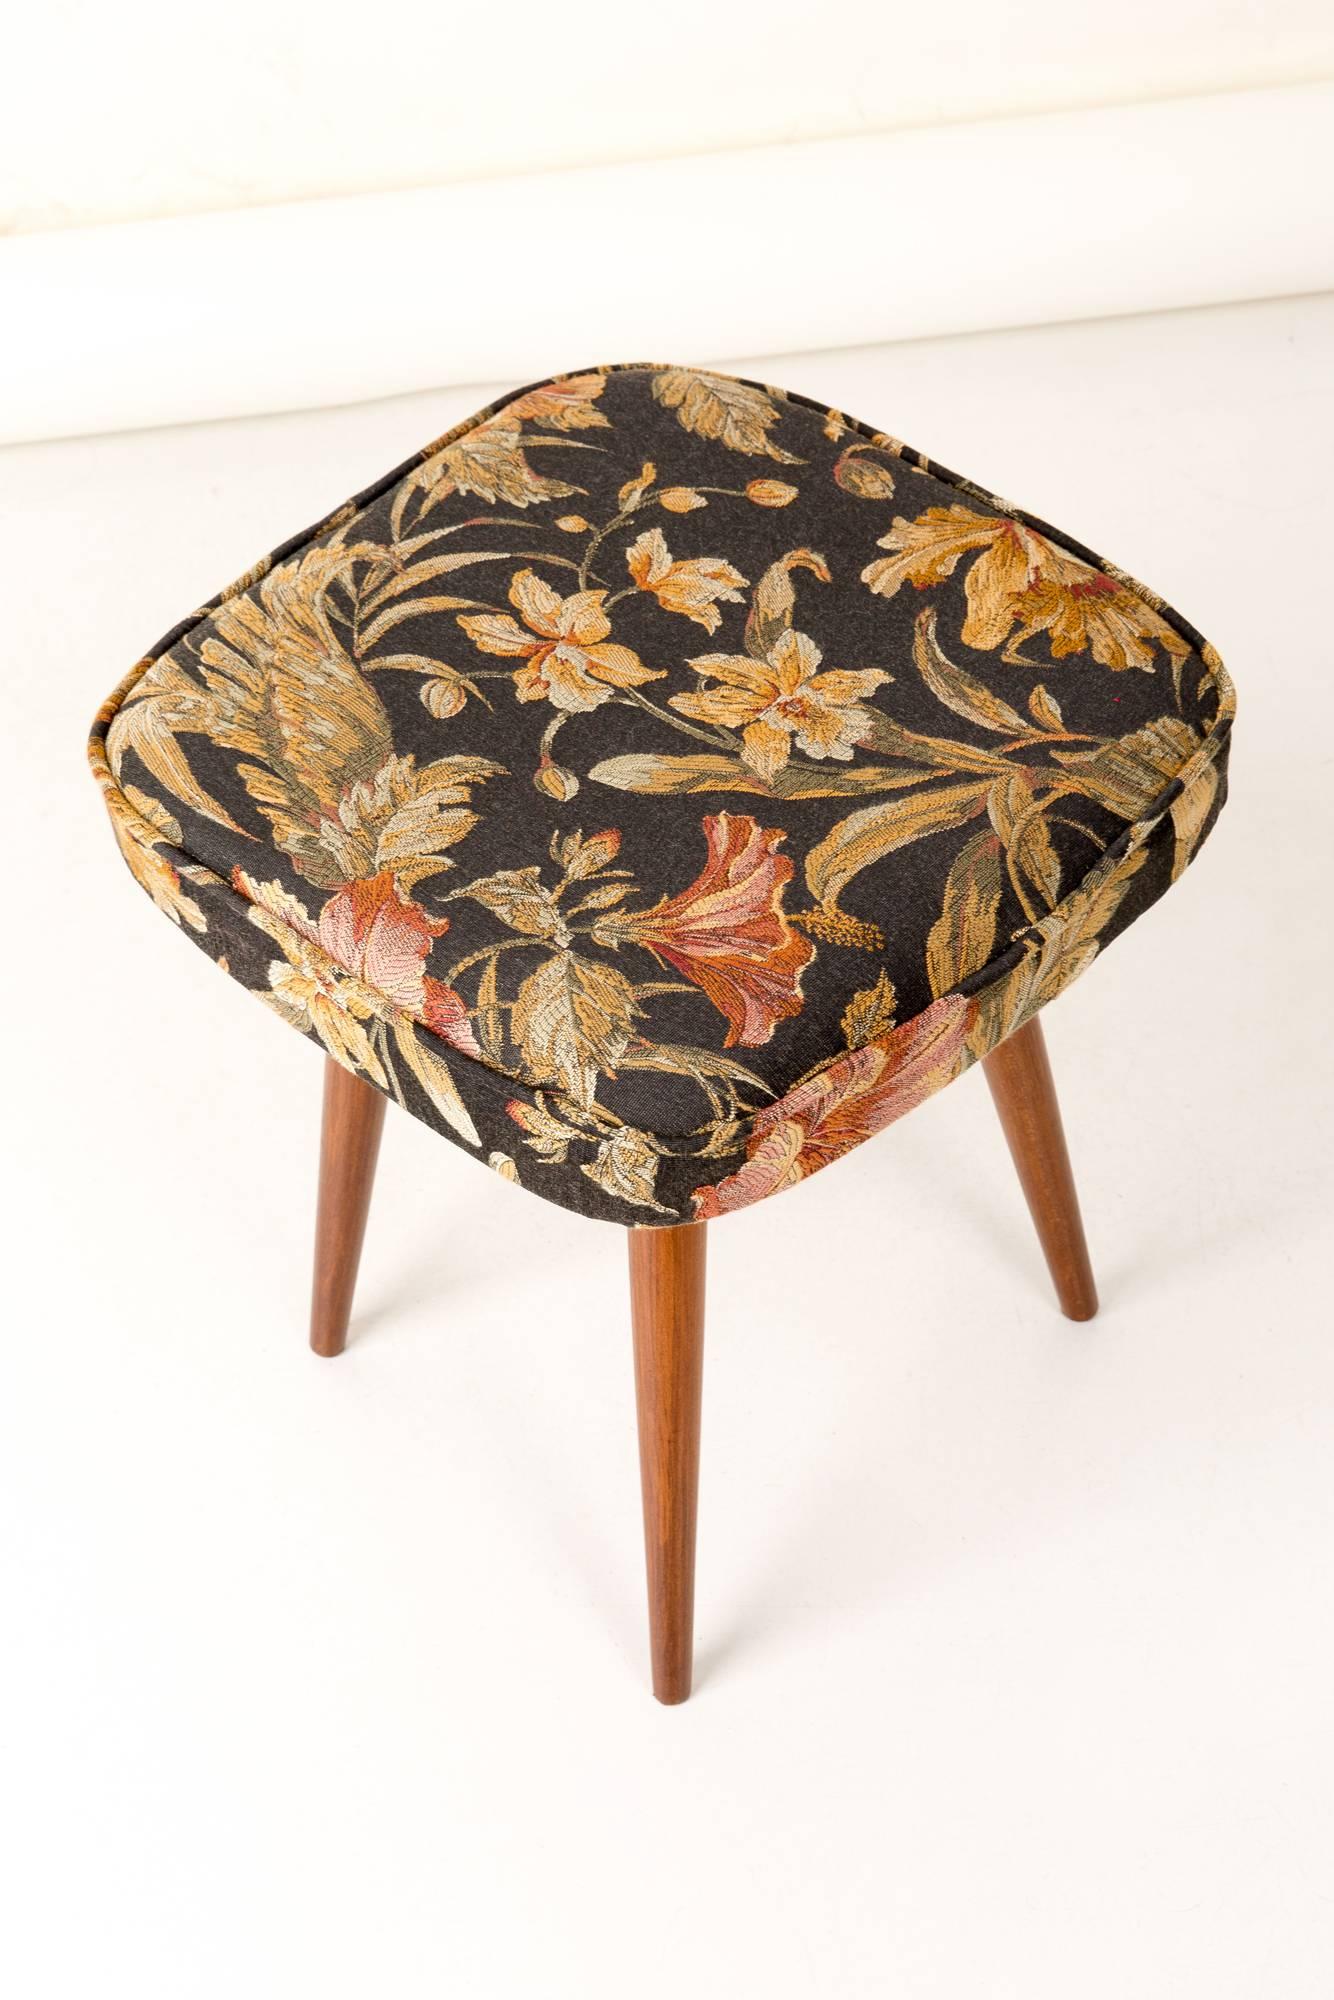 Stool from the turn of the 1960s and 1970s. Beautiful black floral upholstery. The stool consists of an upholstered part, a seat and wooden legs narrowing downwards, characteristic of the 1960s style. We can prepare this stool also in another option